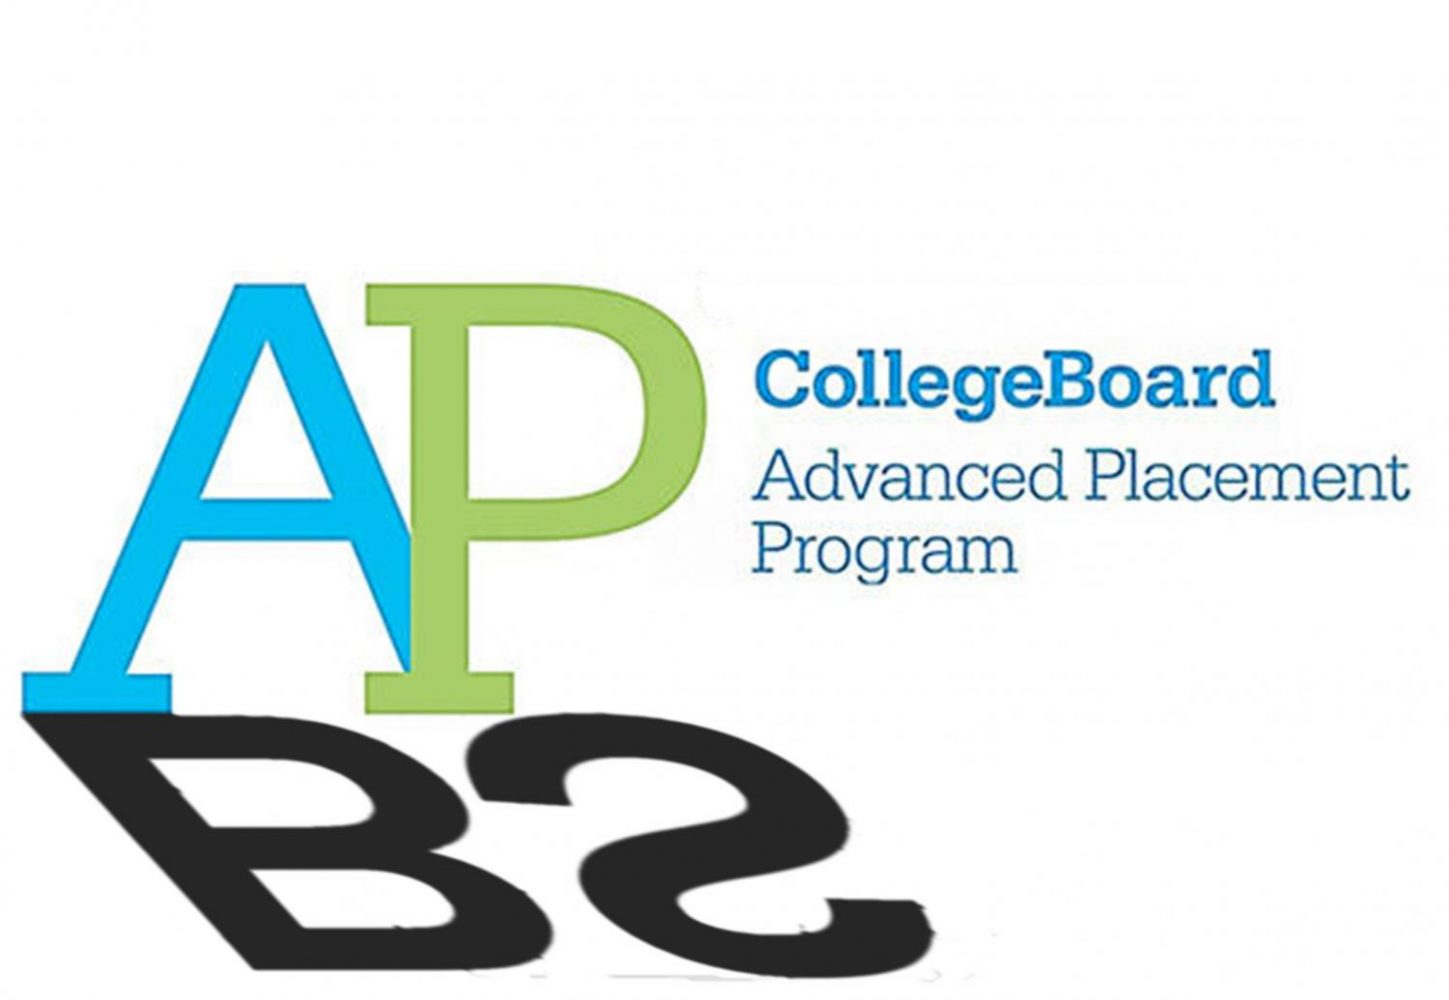 AP College Board During the Pandemic – The Pioneer Press